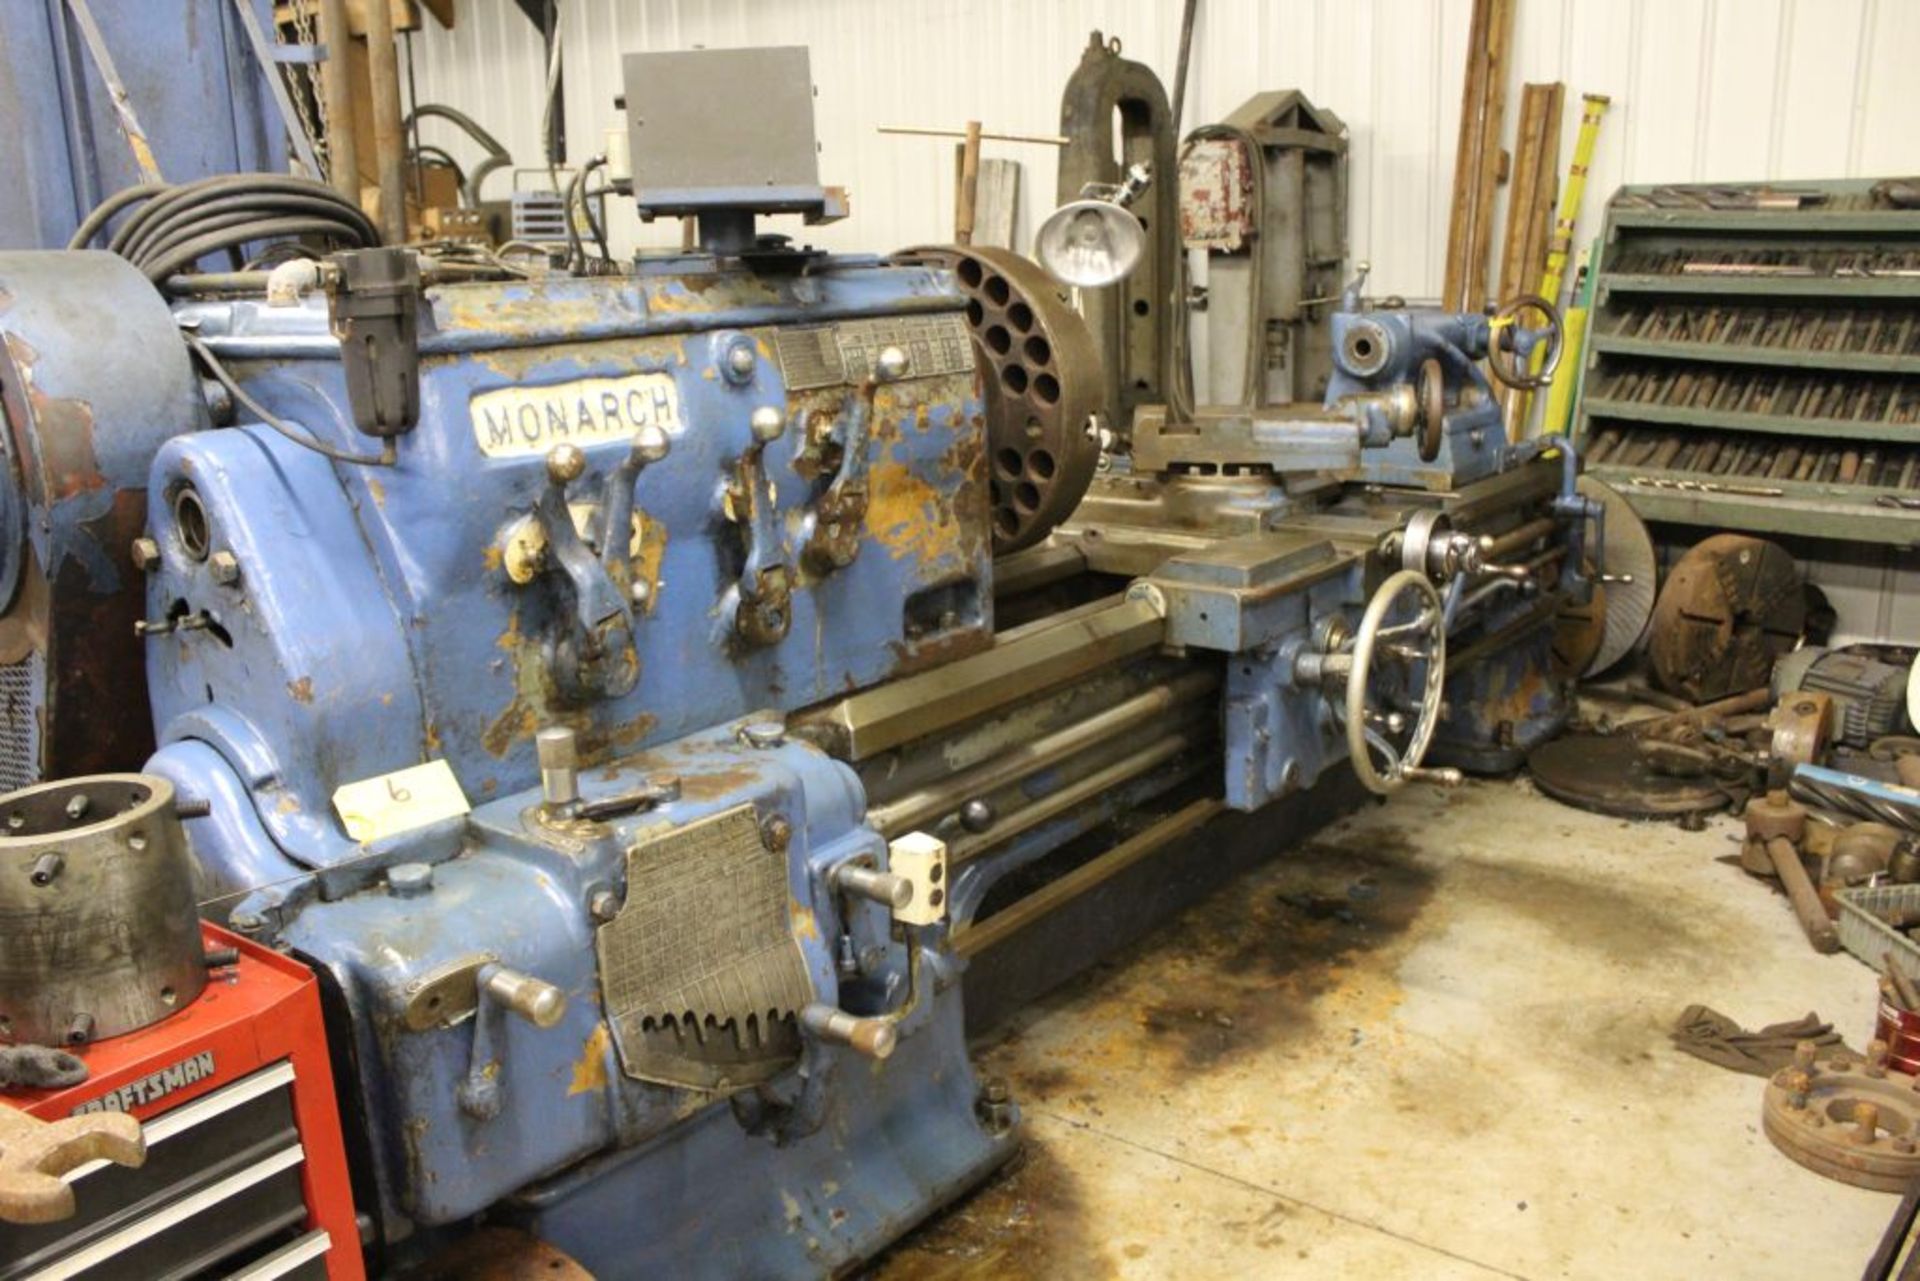 1952 Monarch lathe, sn 35209, 20", 2 1/4" hole, 96" bed, 27.5 swing, 72" center to center, tooling